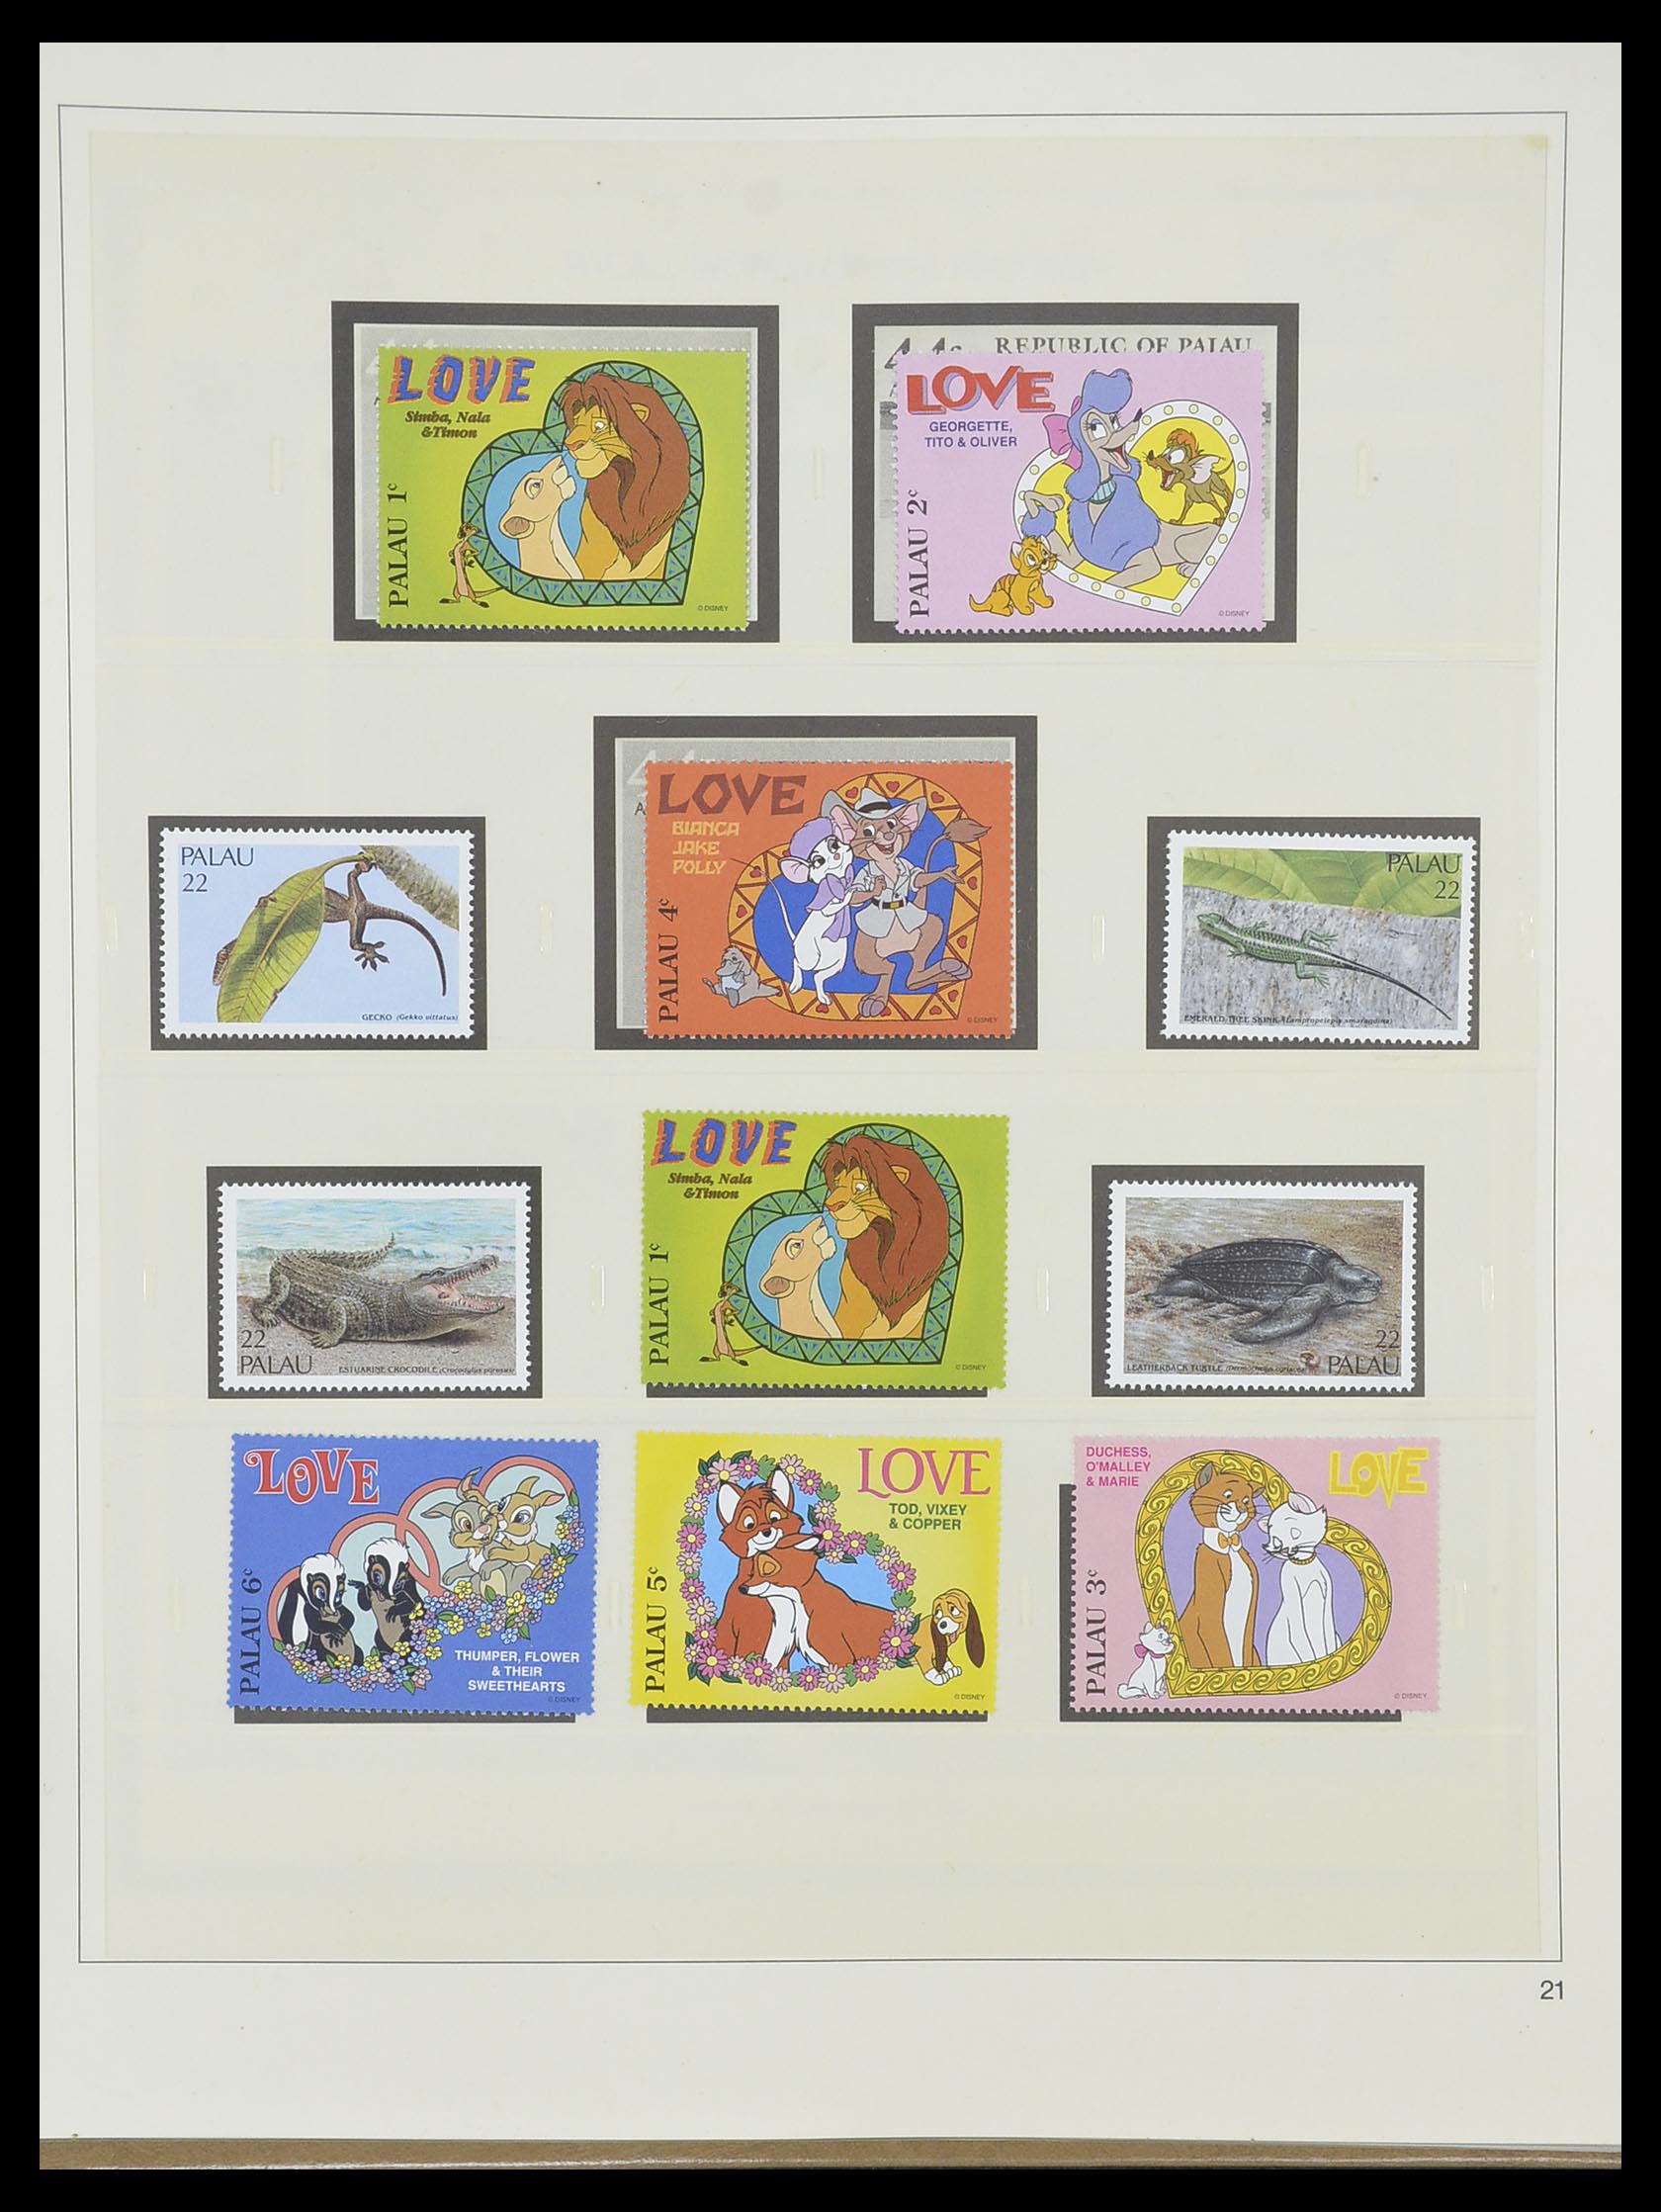 33852 021 - Stamp collection 33852 Palau 1983-1999.